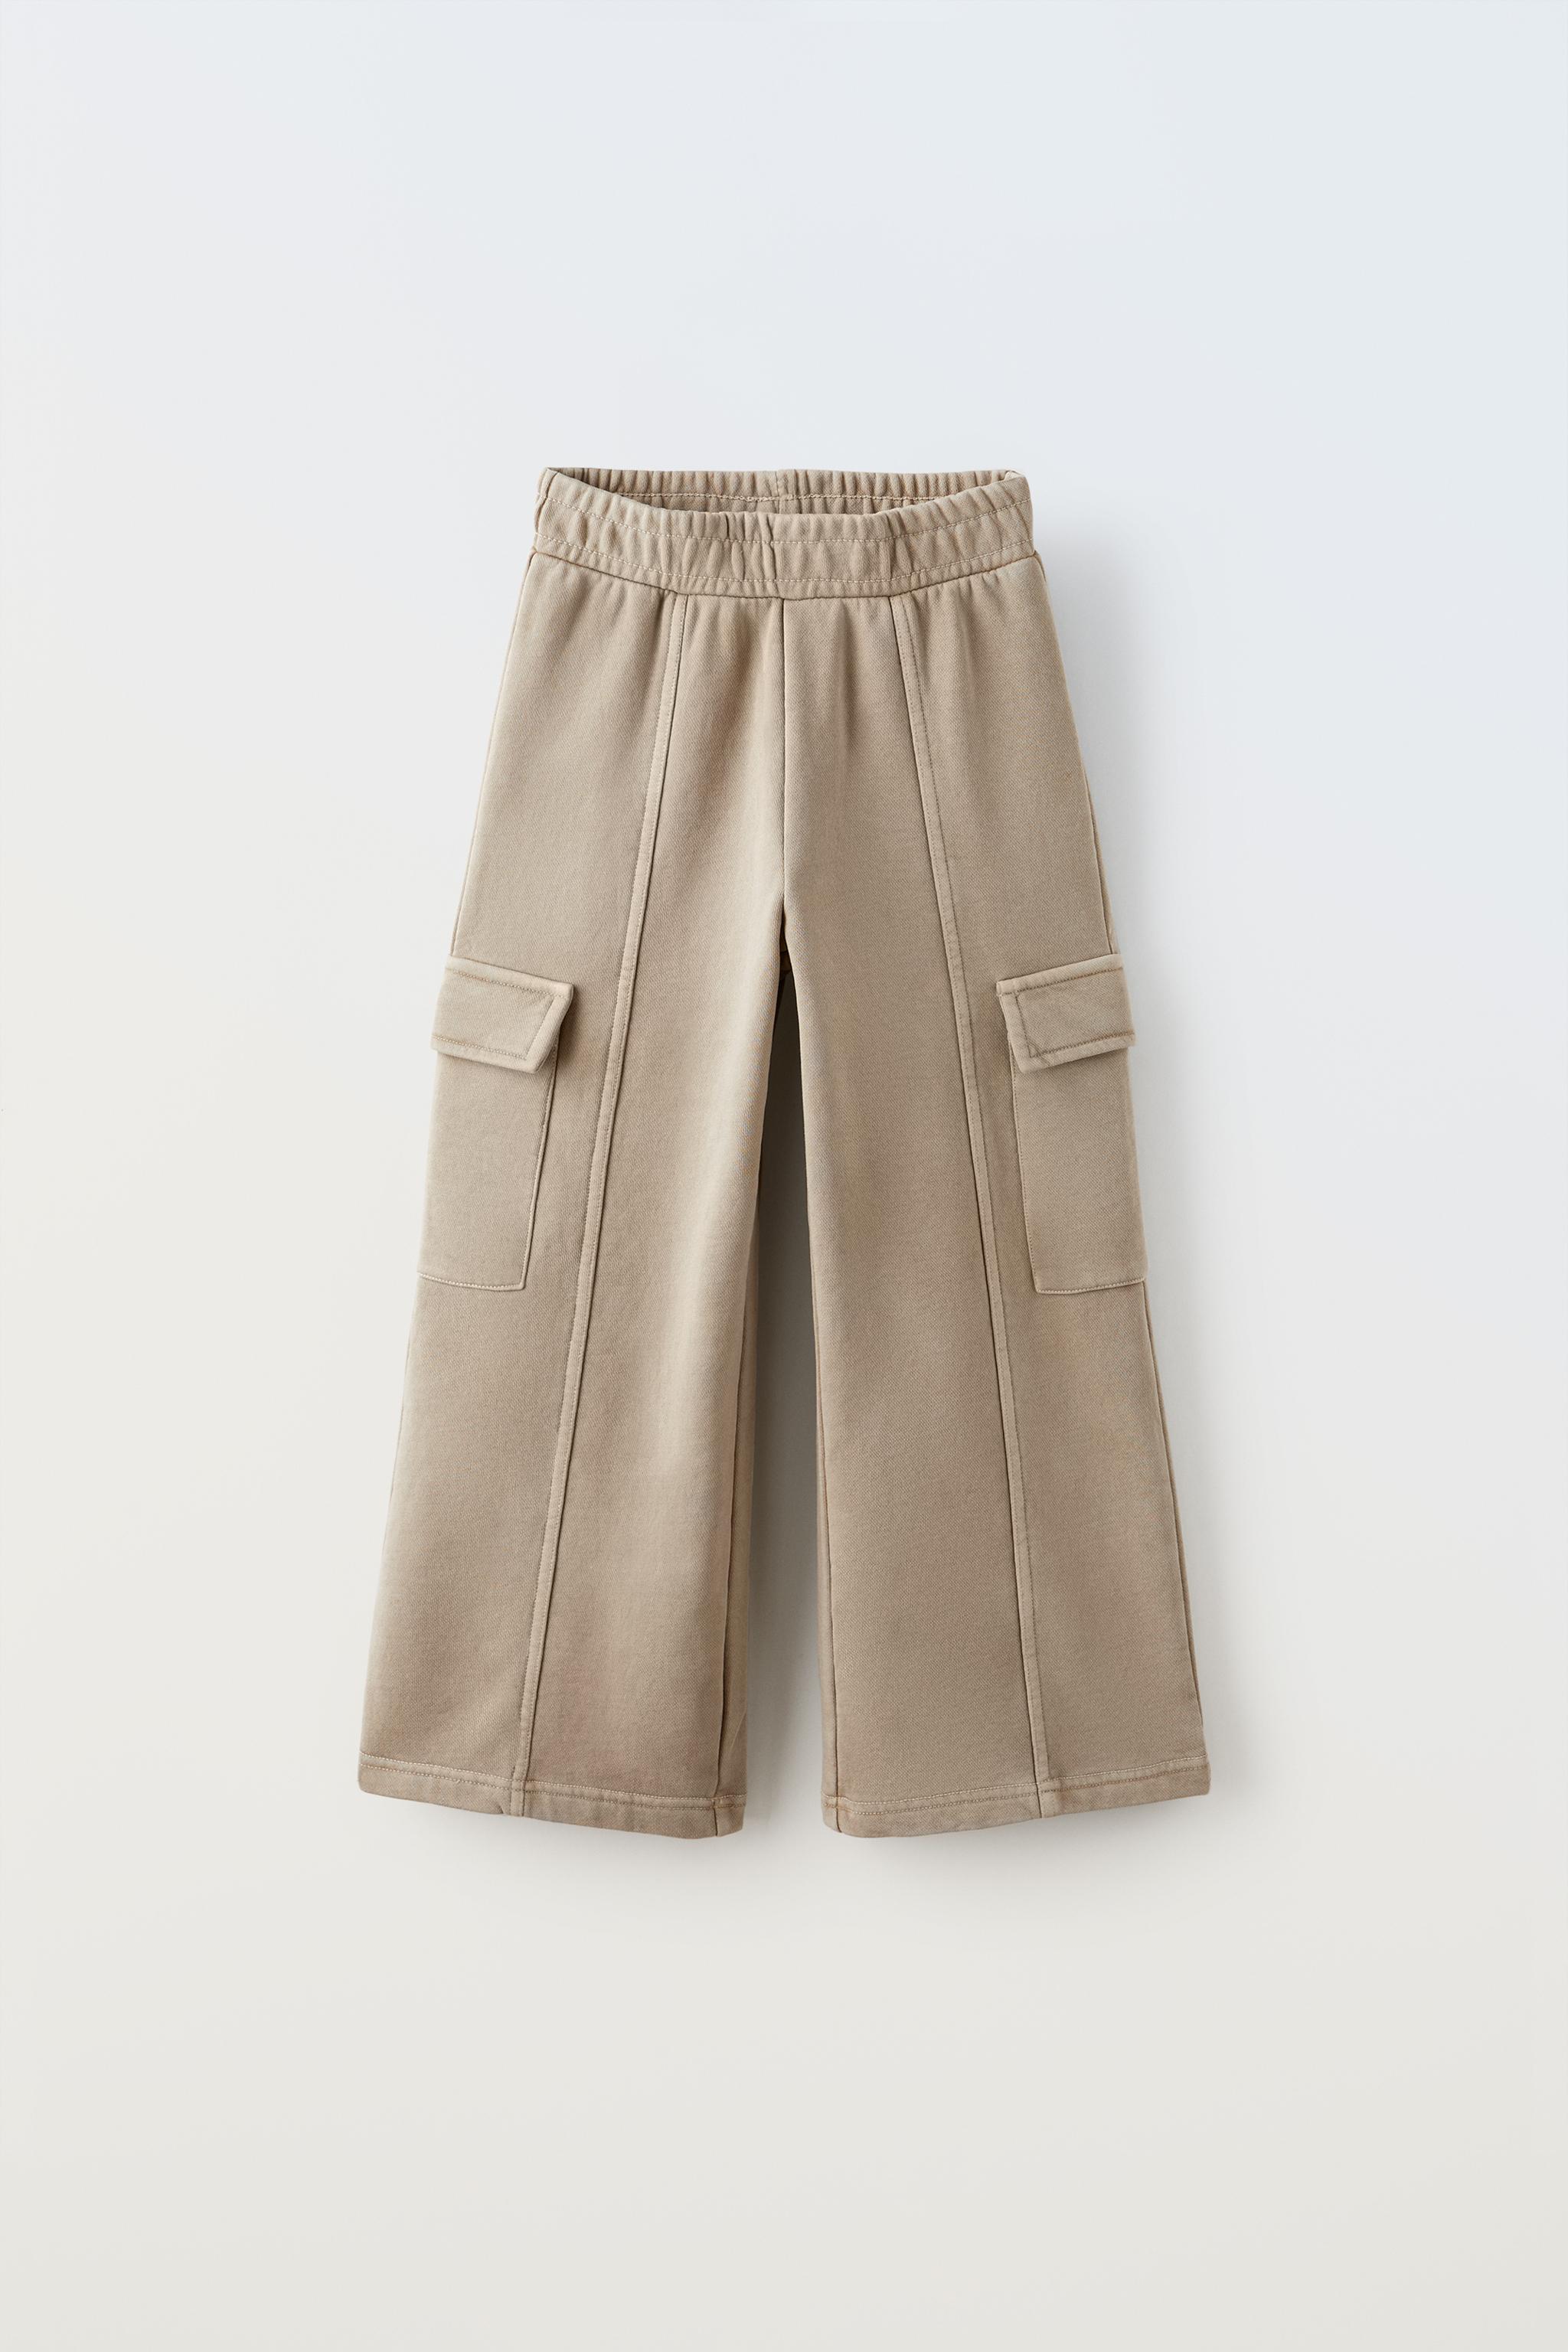 ZARA WOMAN NWT SS23 BEIGE CARGO PANTS LIMITED EDITION ALL SIZES 2212/479